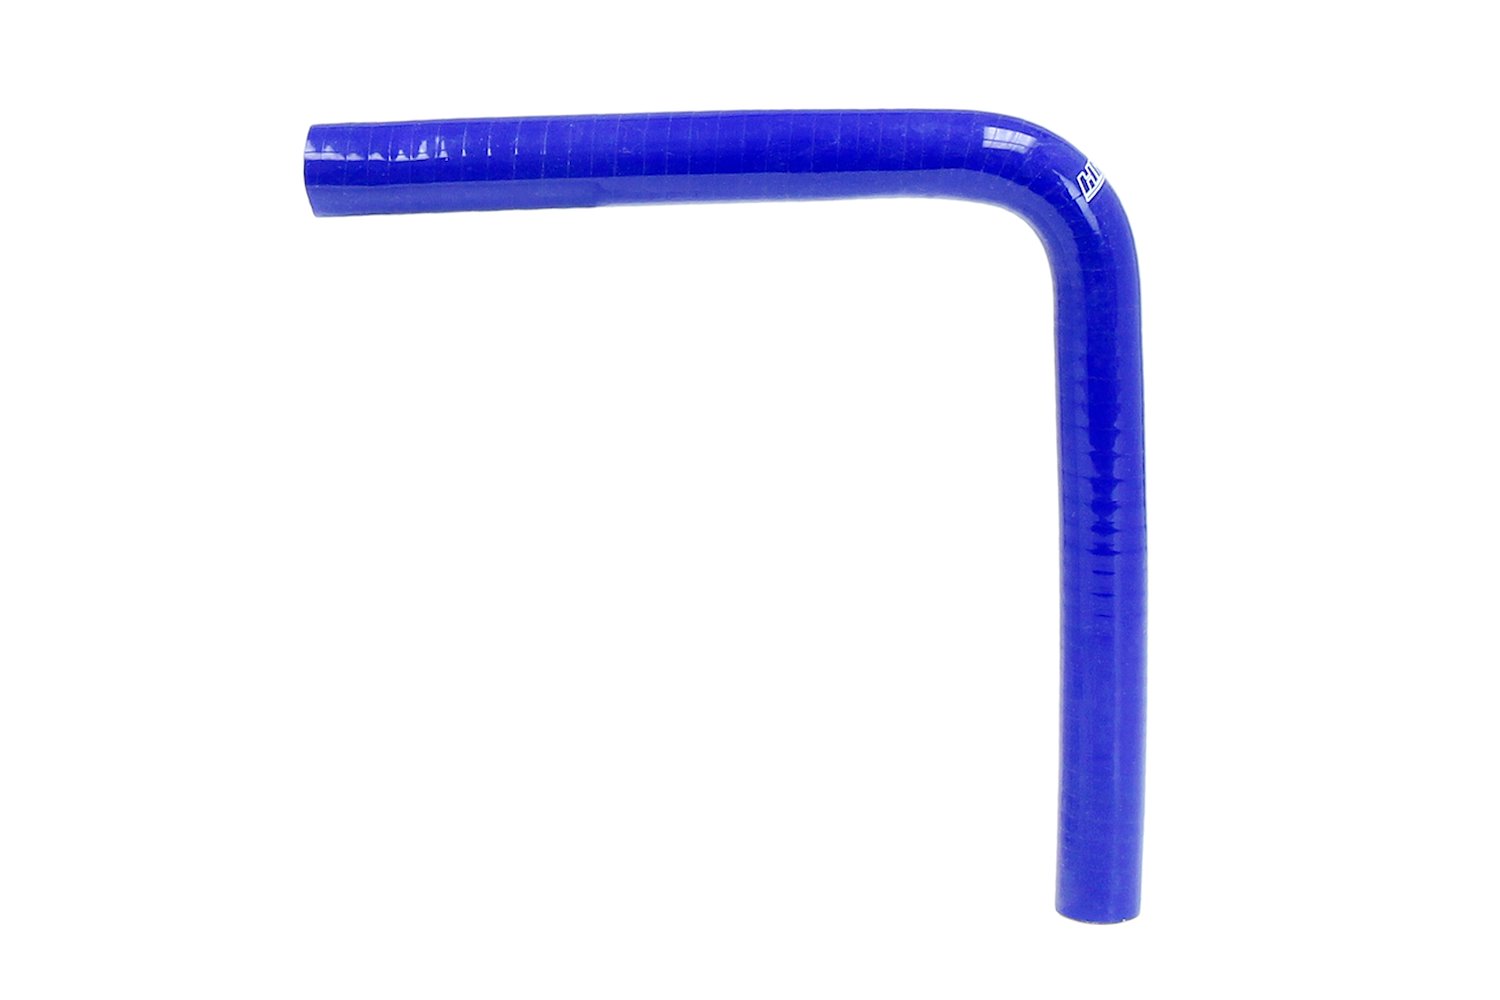 HTSEC90-175-BLUE Silicone 90-Degree Elbow Coupler Hose, High-Temp 4-Ply Reinforced, 1-3/4 in. ID, Blue